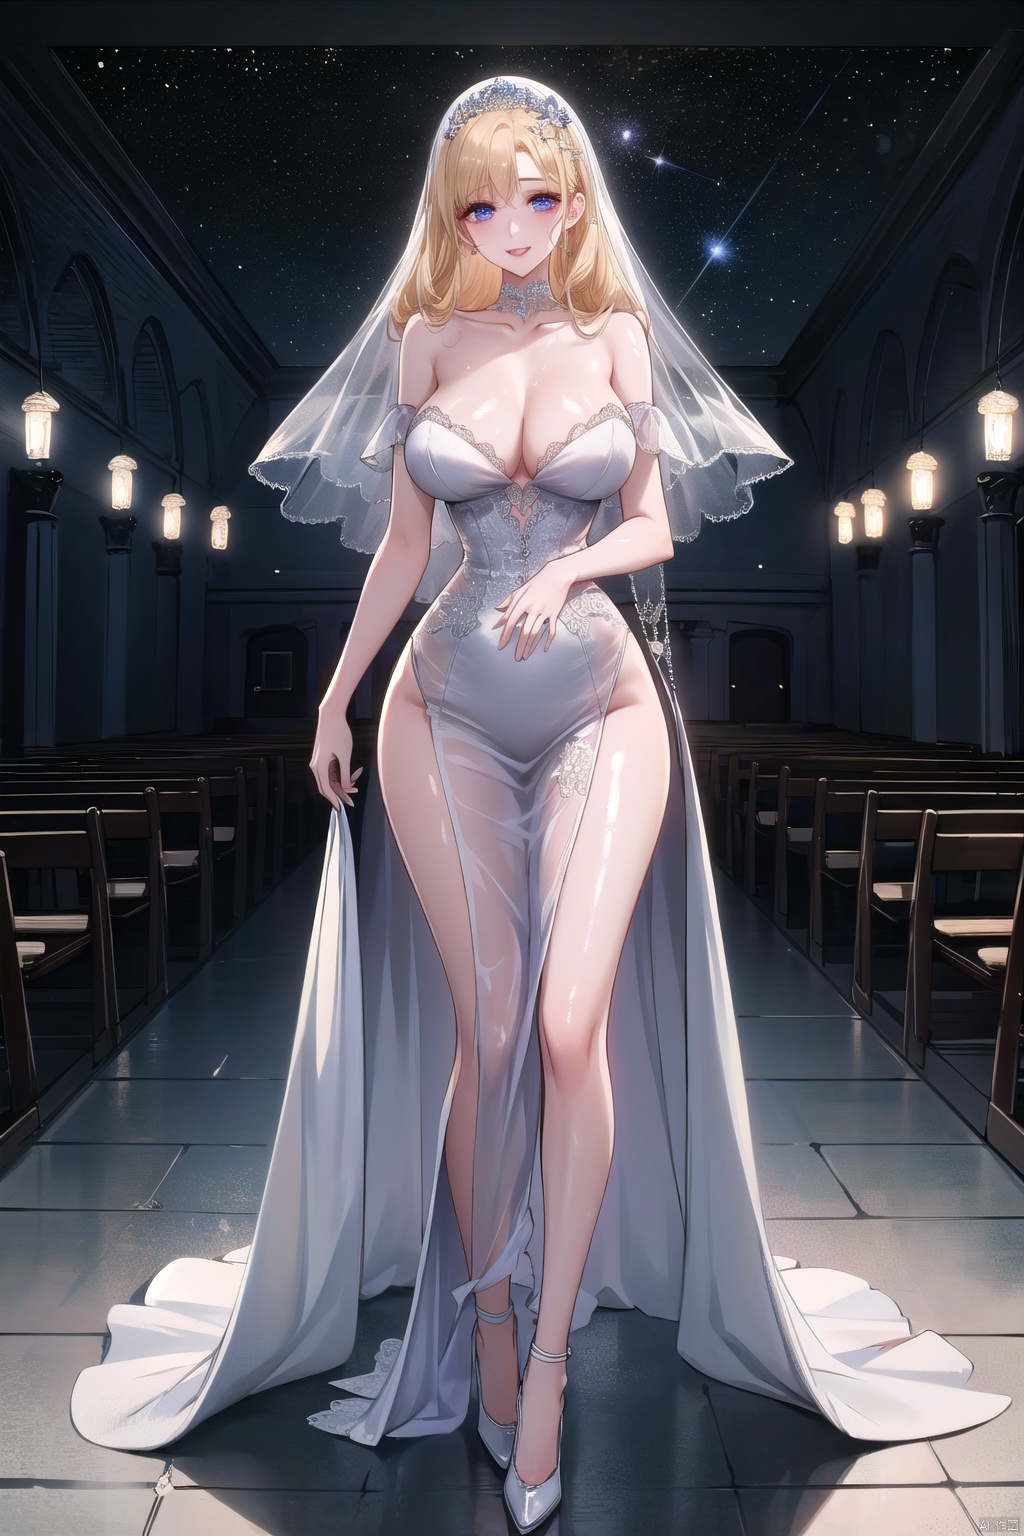  Extra large breasts,In the surreal wedding scene, a girl stood in the church at night, wearing a lavender haute couture wedding dress, shining like a goddess of stardust. The dark blue dress twinkling in the light, fluffy like the stars flowing, the veil light, stardust embellished, creating a mysterious atmosphere of dream. Under her delicate makeup, her eyes are full of anticipation and happiness. As she moved toward the center, every step was dignified and elegant, and every smile was dramatic and hard to look away from. This wedding dress is not only a garment, but also a work of art, combining the designer's pursuit of beauty and happiness to create an unforgettable surreal wedding scene. (Panoramic view, full body, hands down), fanxing